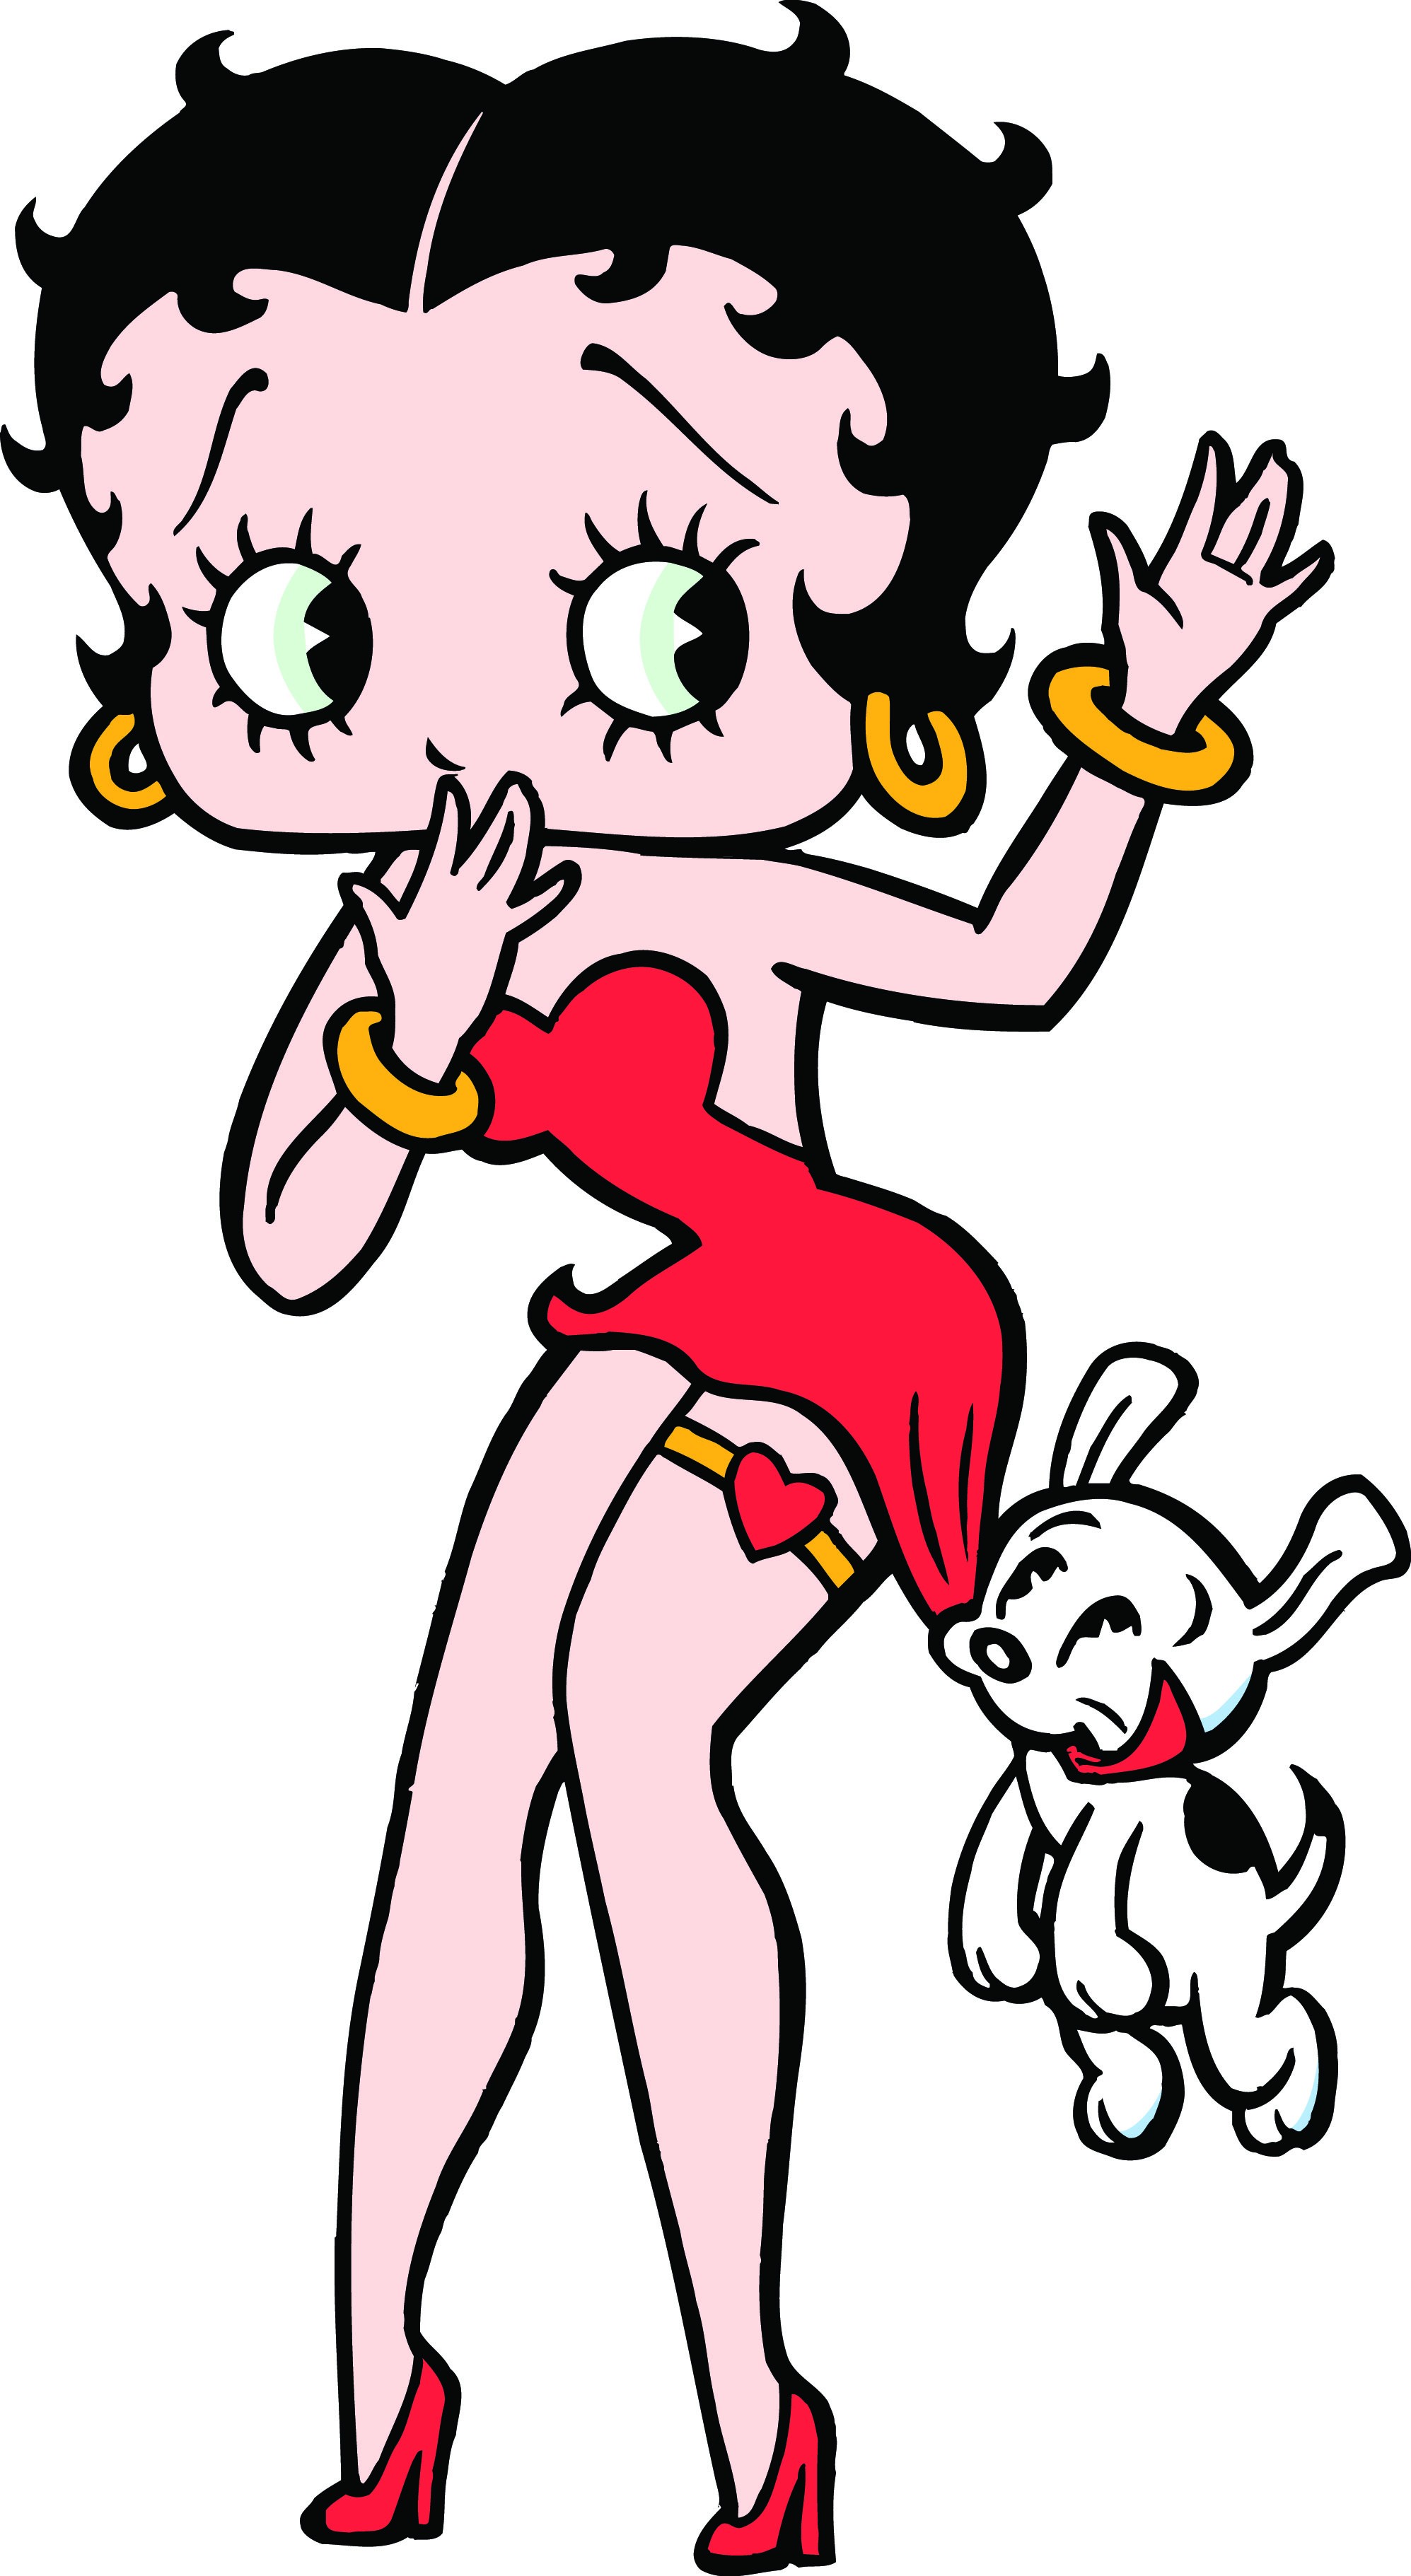 Betty Boop Wallpaper Download Free Cool High Resolution Backgrounds For Desktop Mobile Laptop In Any Resolution Desktop Android Iphone Ipad 19x1080 2560x1440 3x480 19x10 Etc Wallpapertag